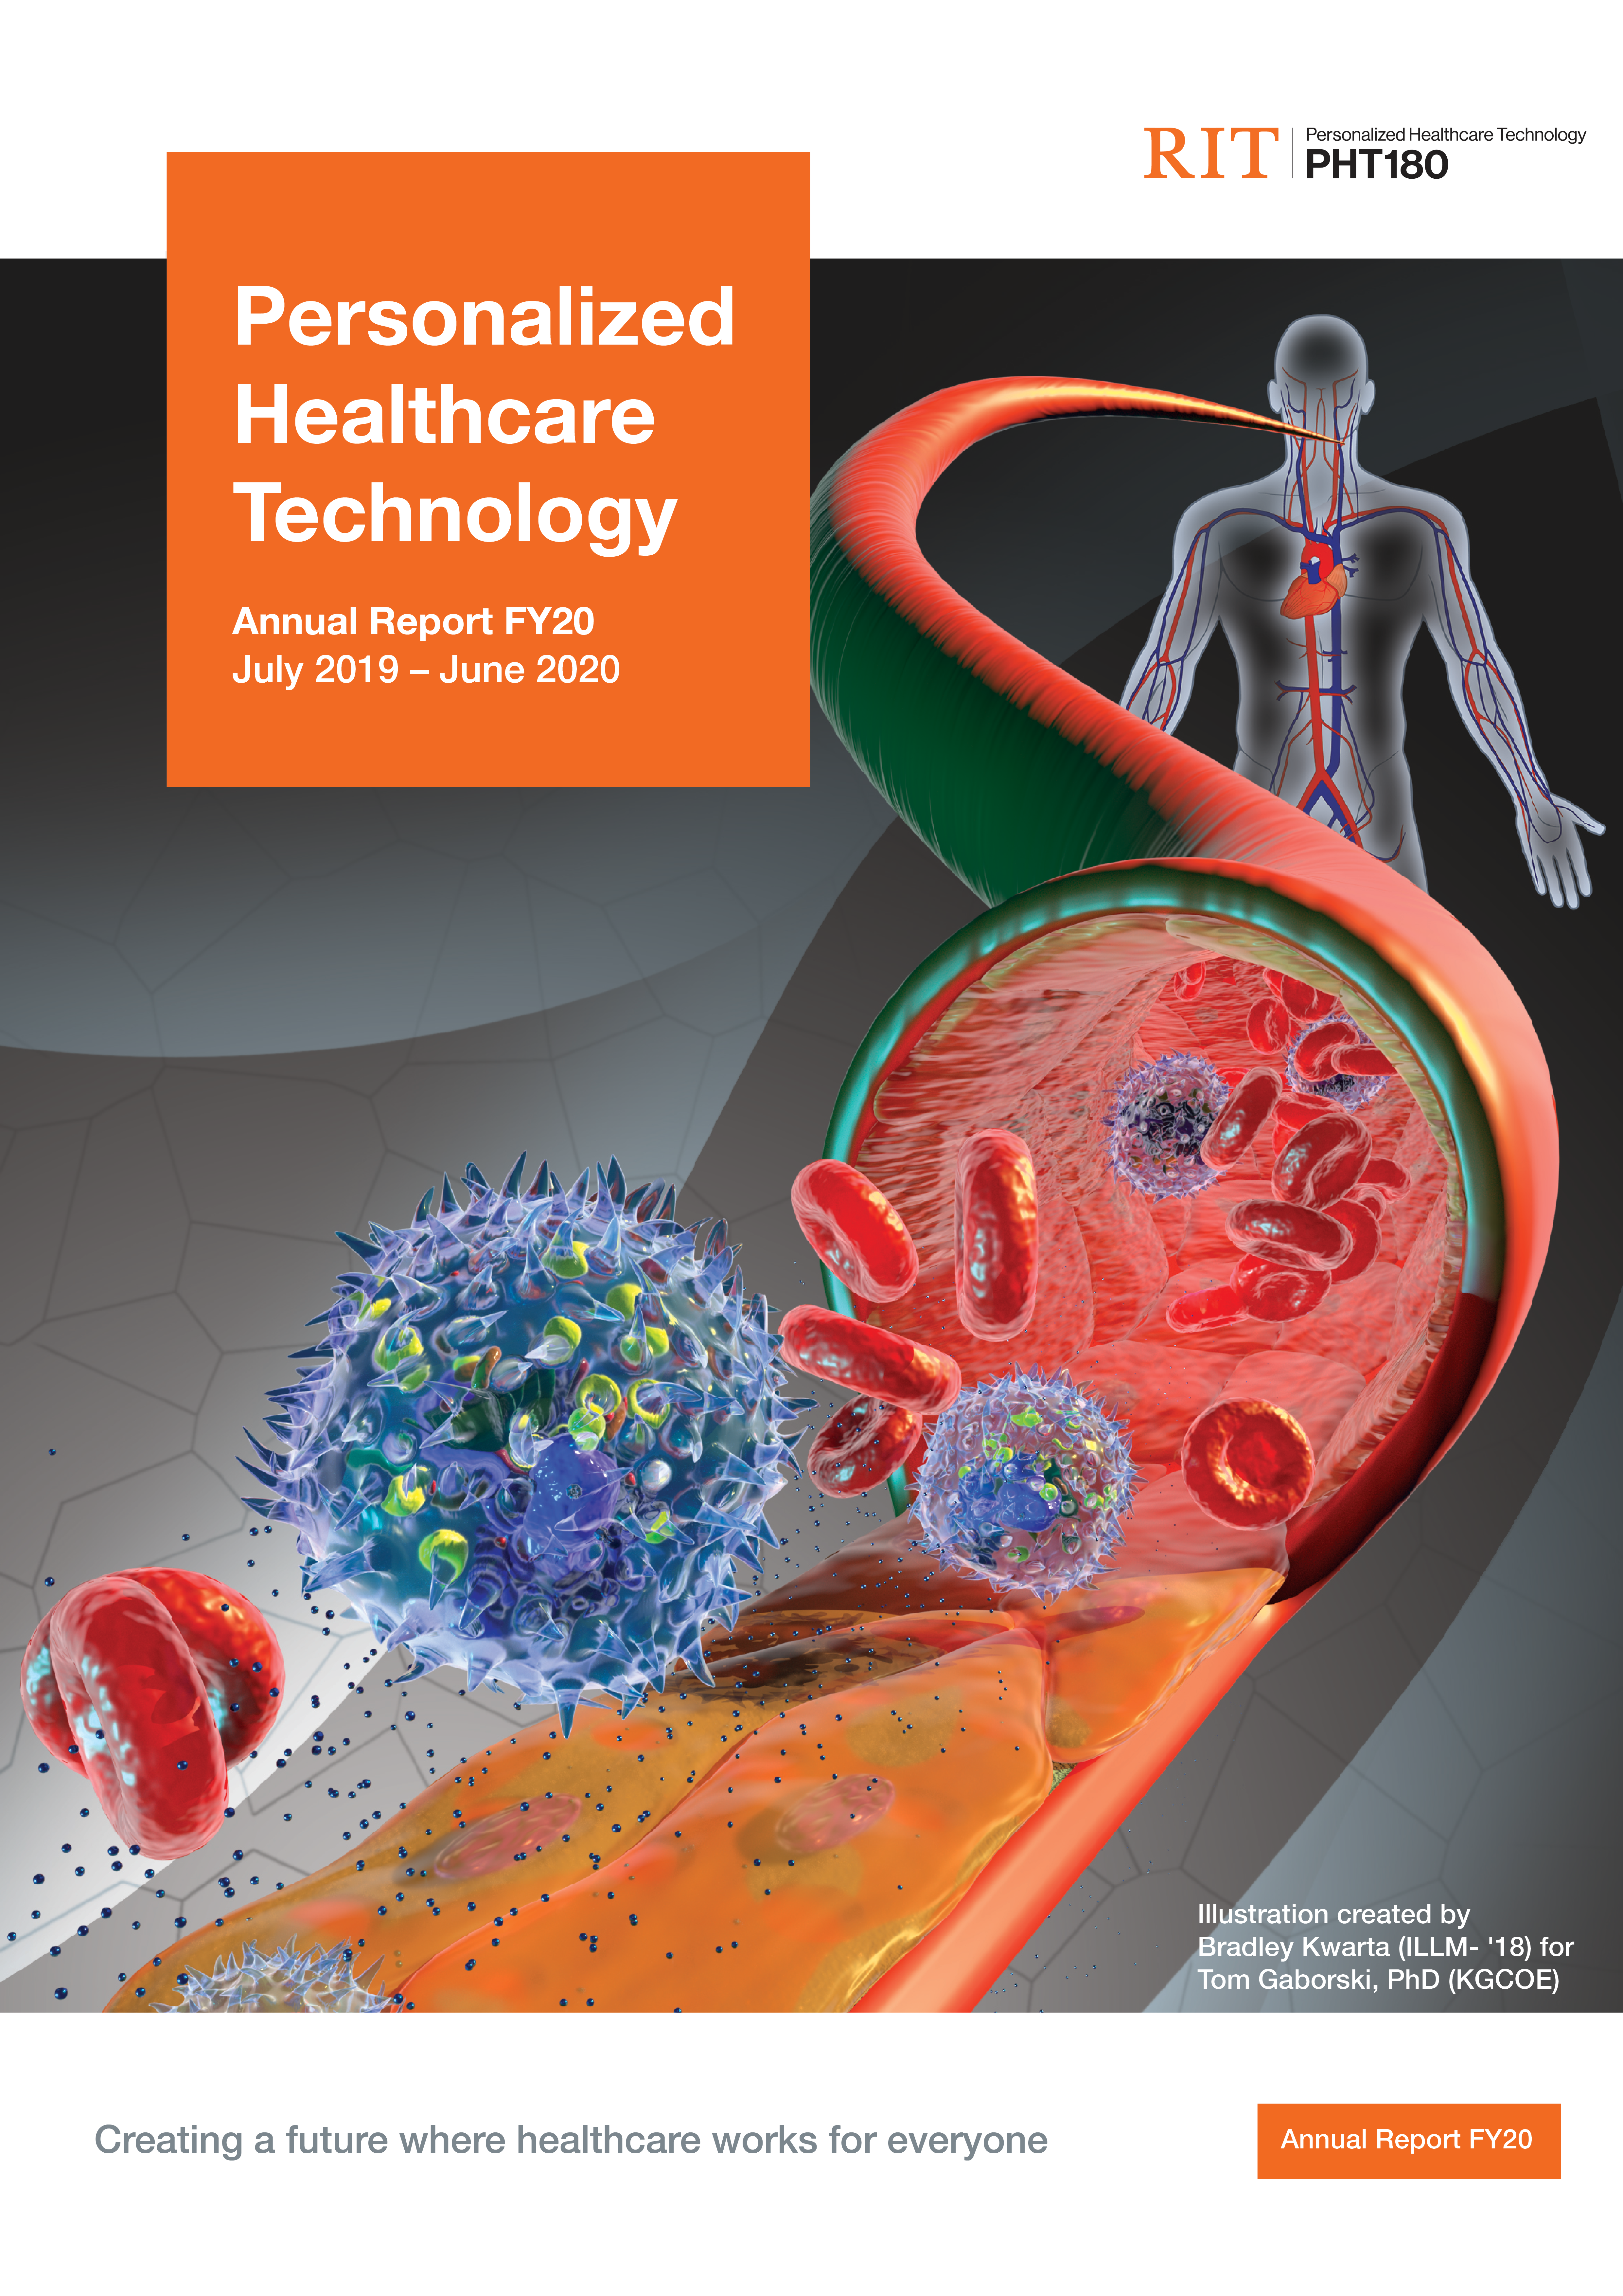 PHT180 Annual report cover with graphic of the inside of a  person's vein system leading to a single vein showing how cells interact with a virus